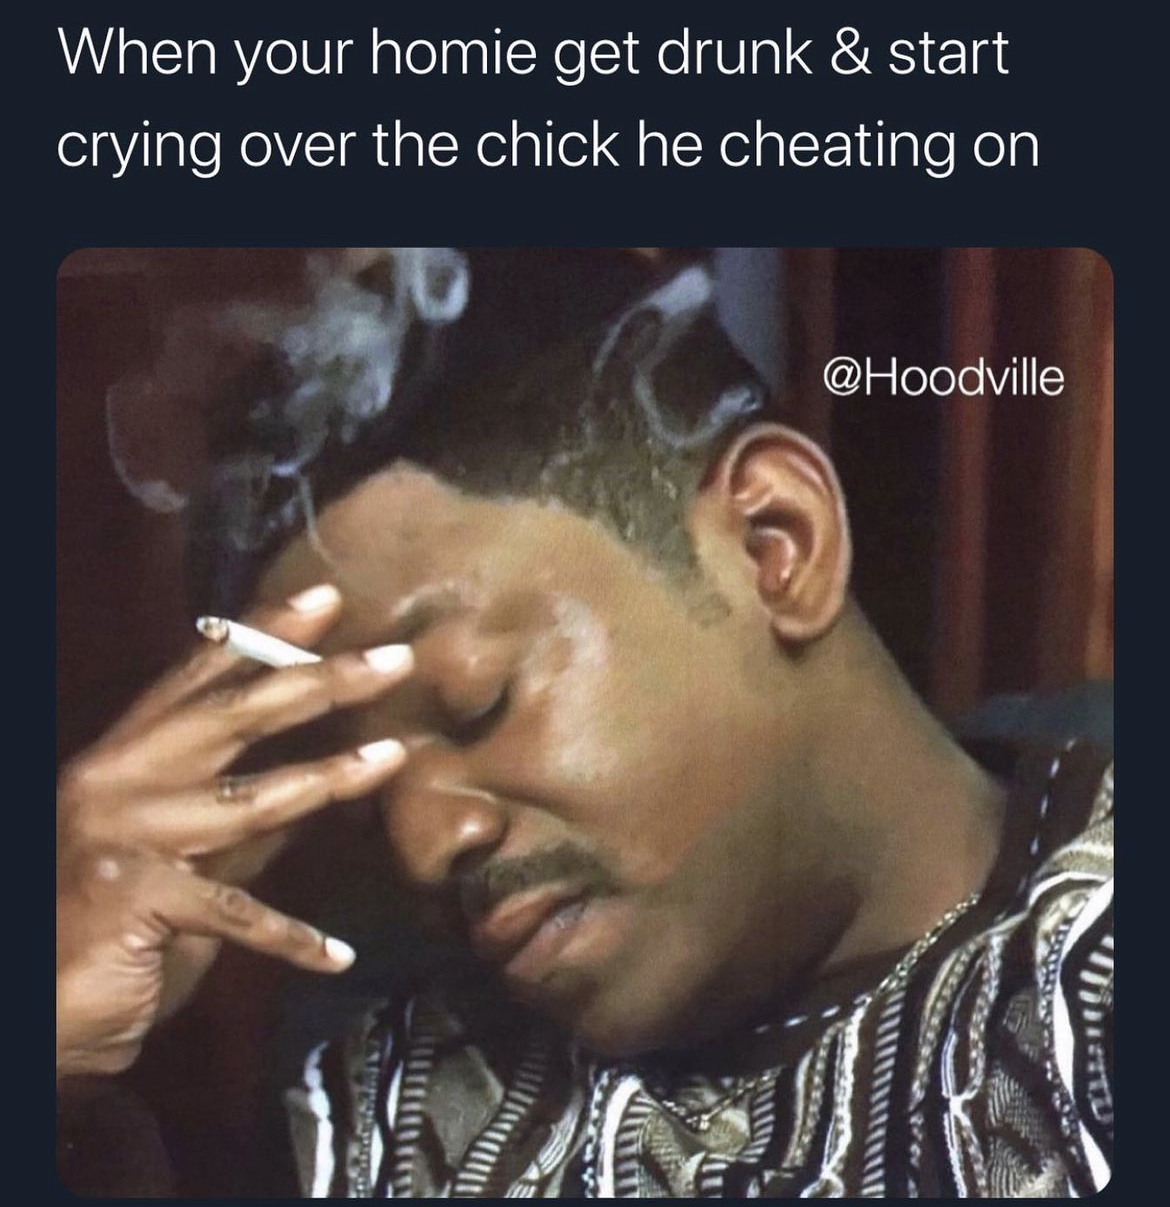 Hoodville memes and captions - album cover - When your homie get drunk & start crying over the chick he cheating on